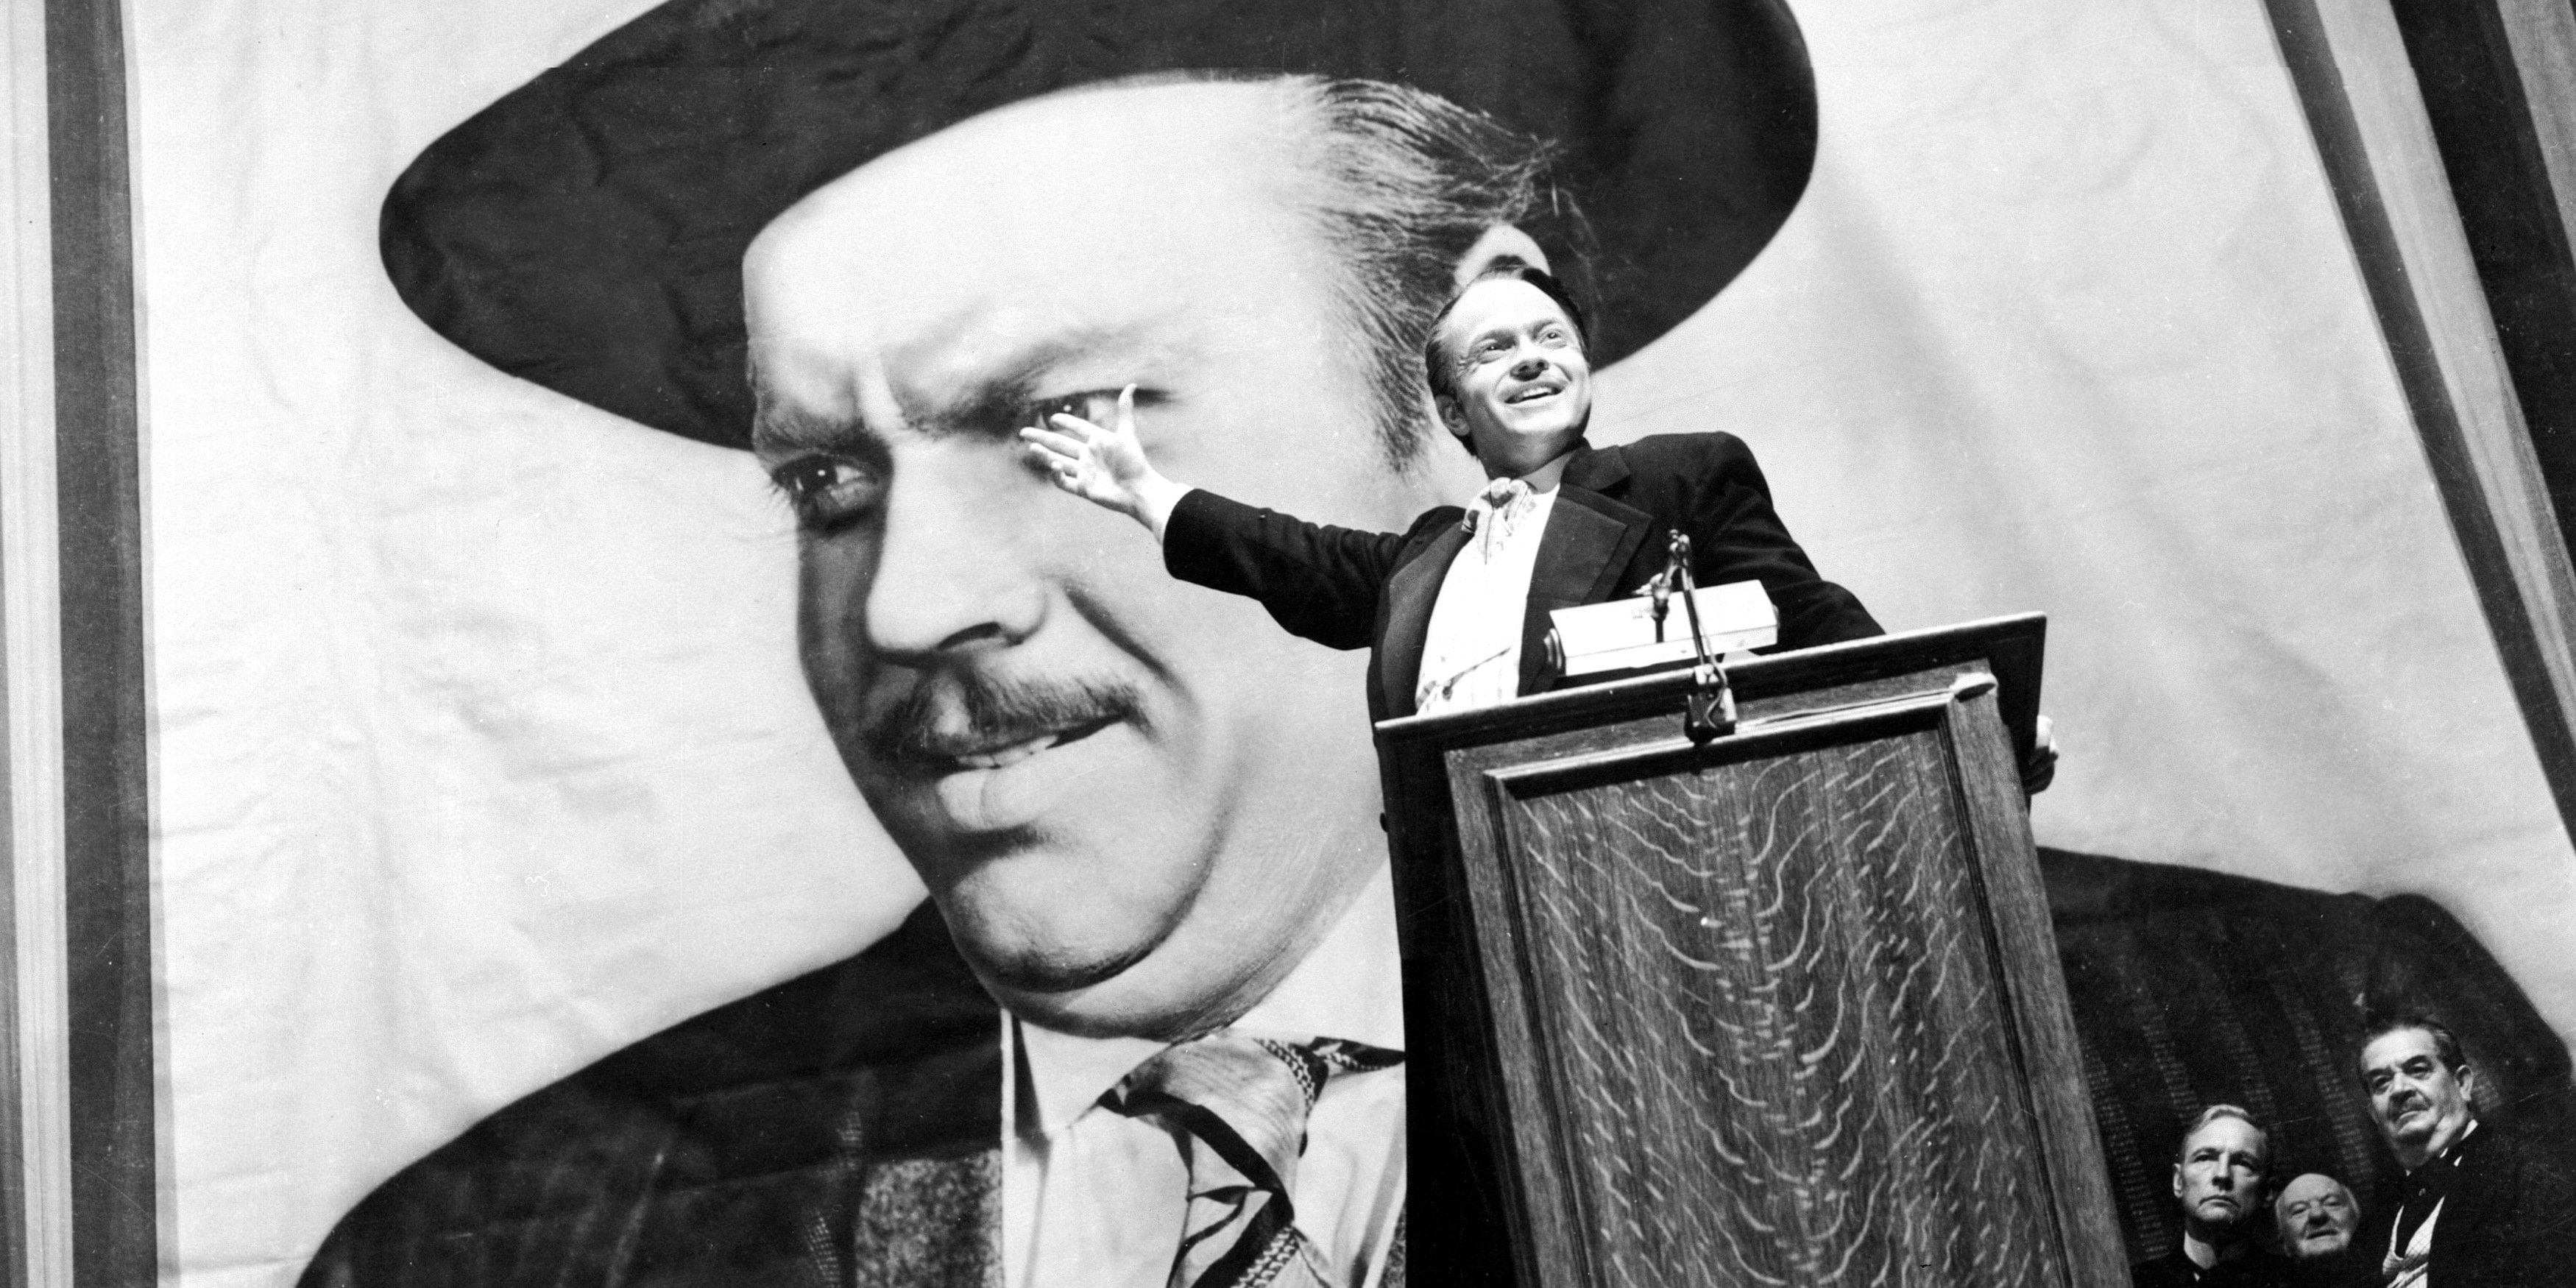 Charles Foster Kane in front of a portrait of himself in Citizen Kane